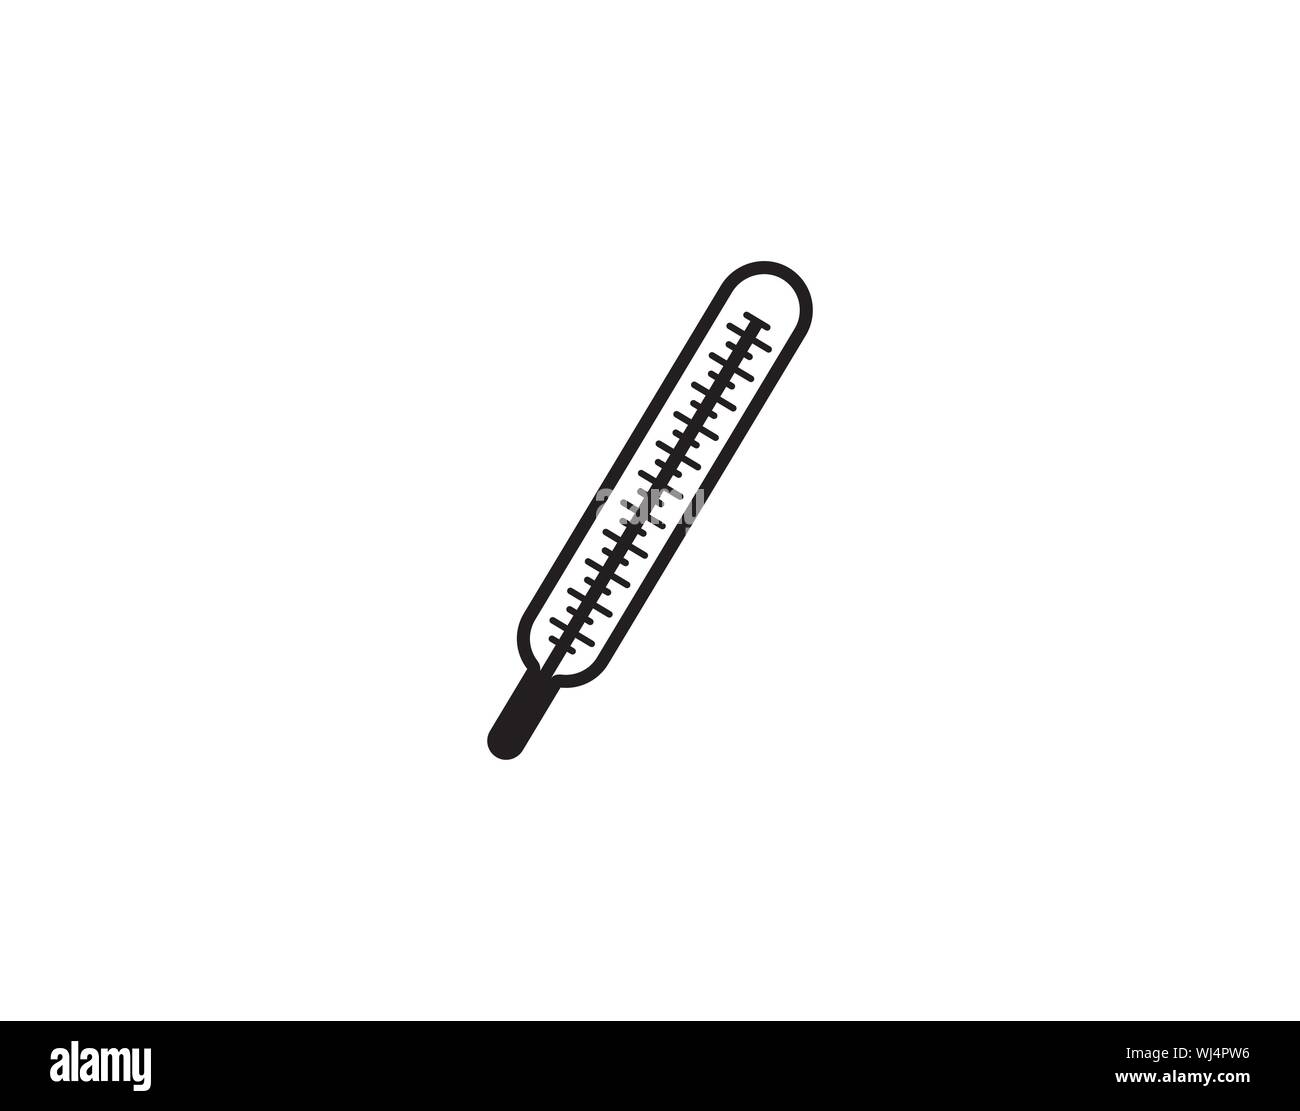 Thermometer icon flat style vector illustration. Stock Vector